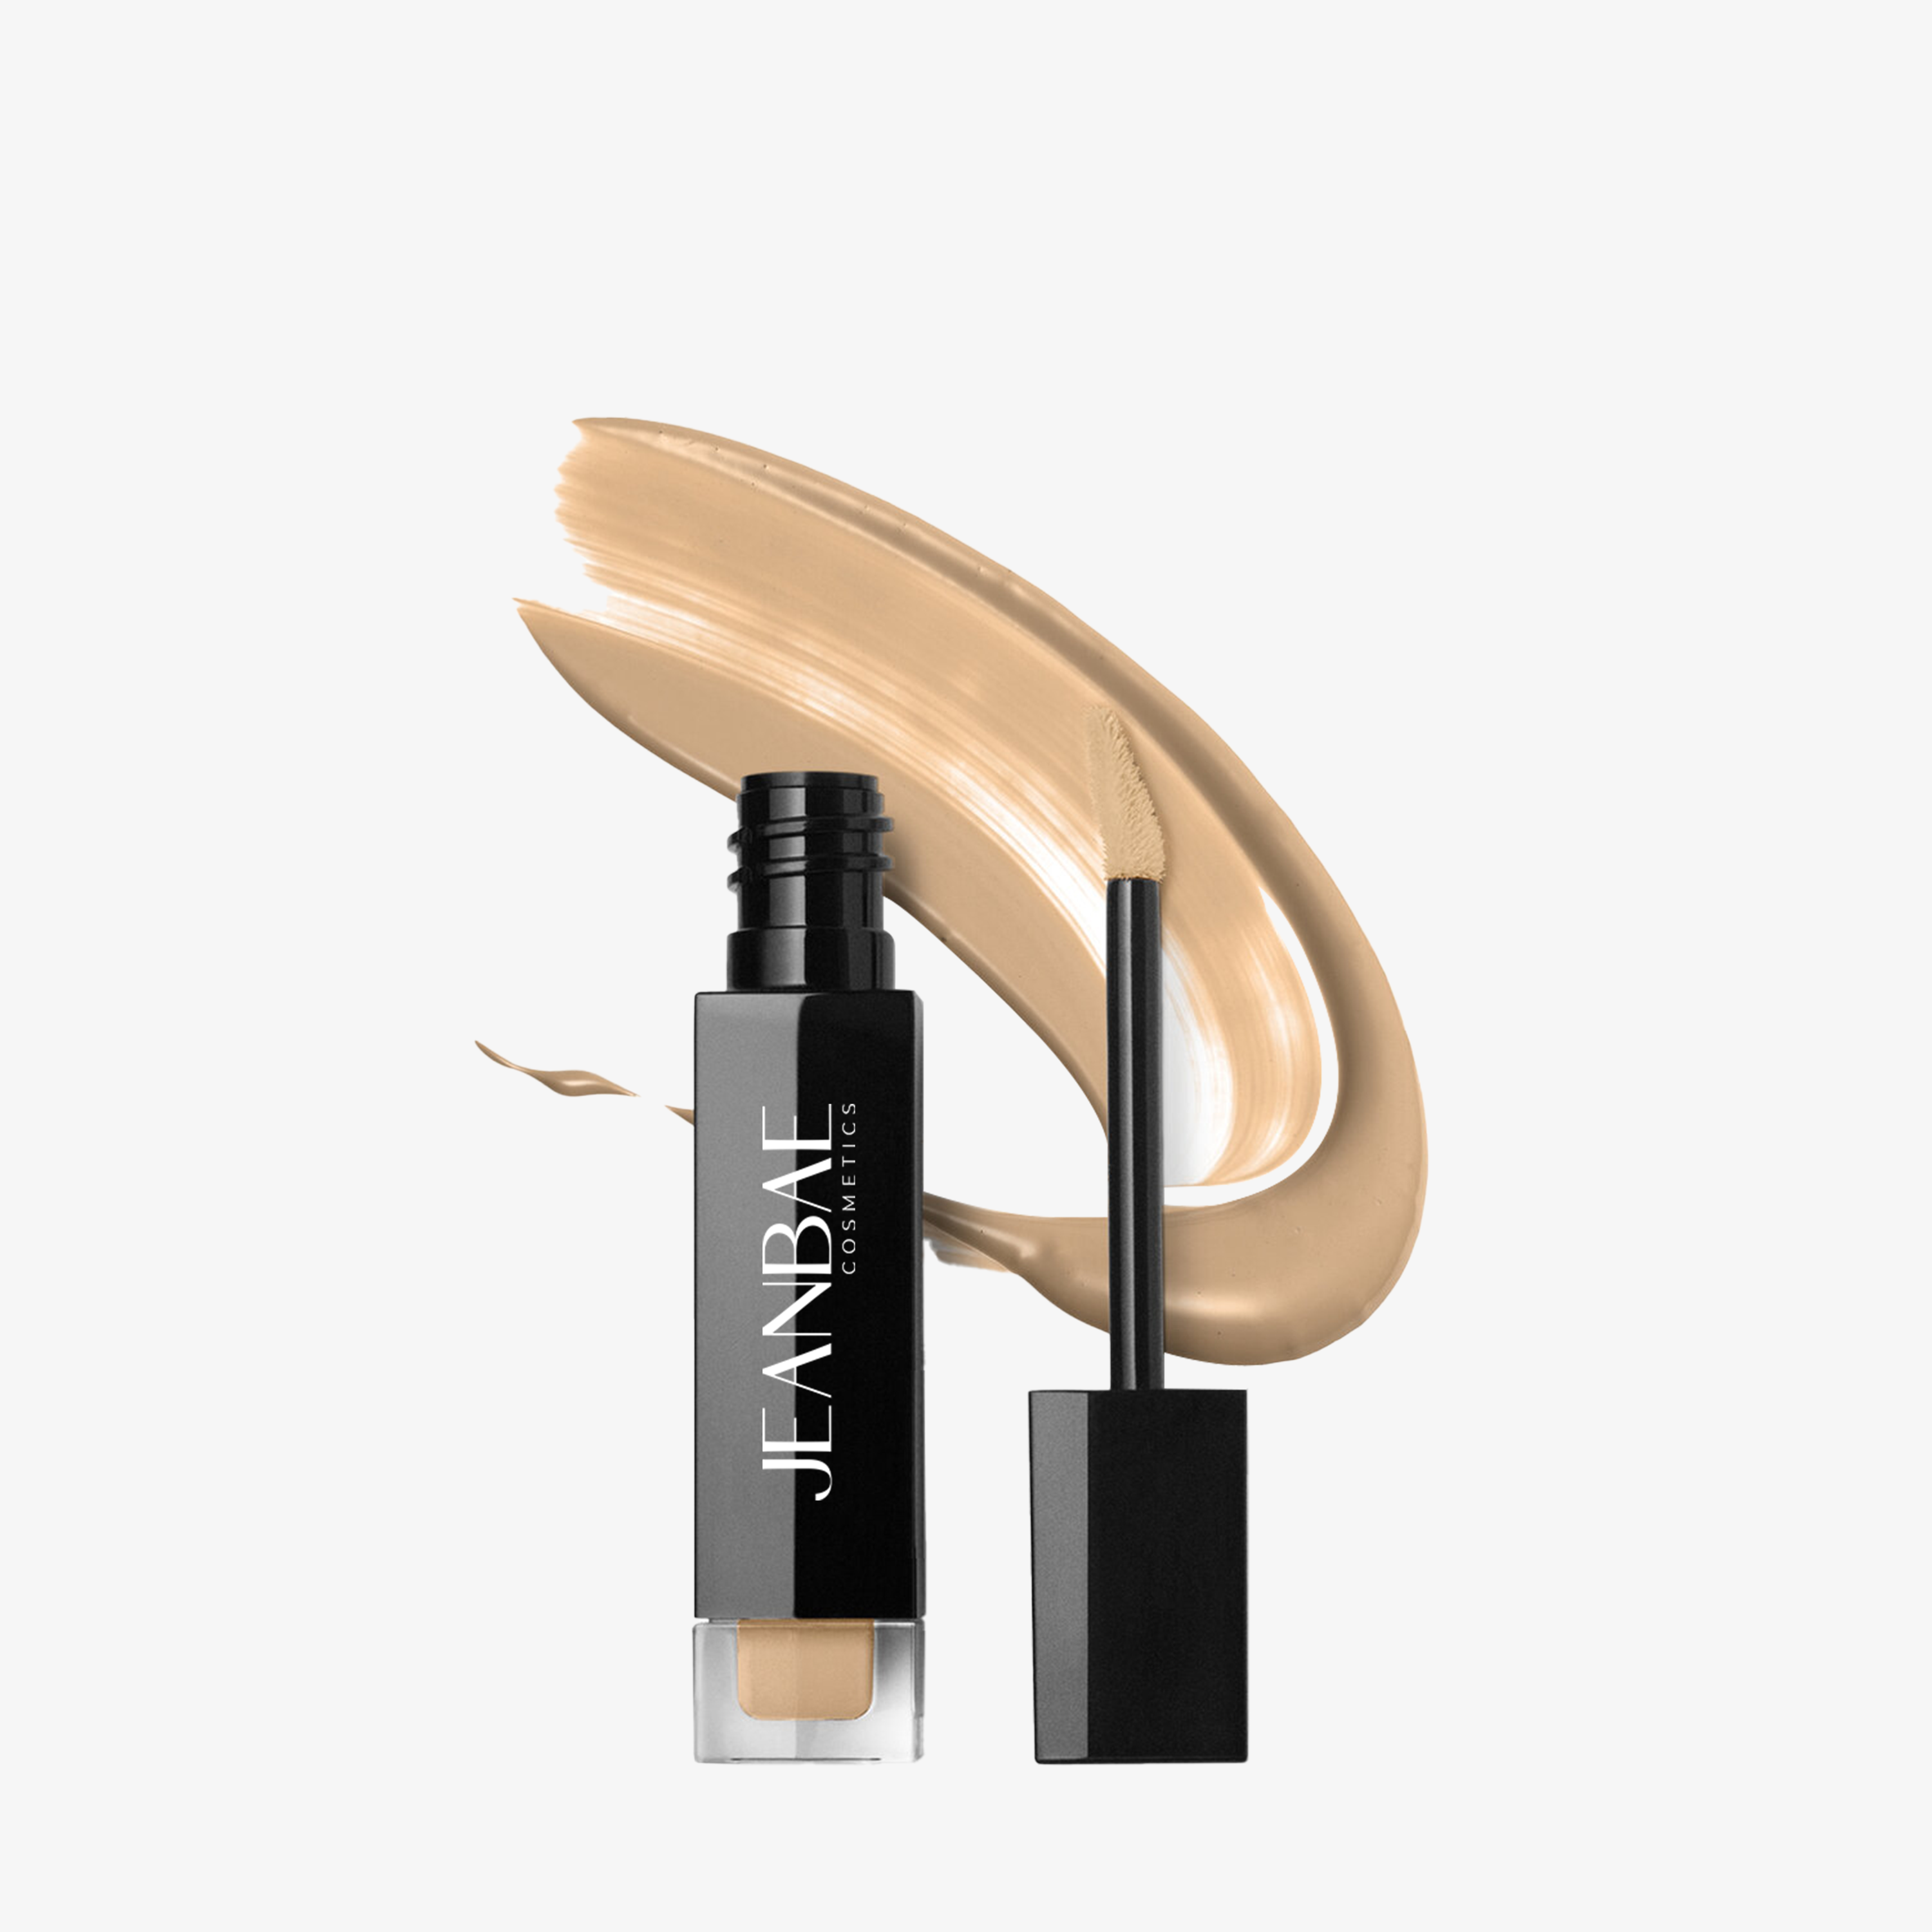 Instantly conceal the appearance of darkness and imperfections with one swipe. Advanced formula provides a supple, comfortable finish for a more unified skin tone that lasts 8 hours. FREE OF Cruelty-Free, Vegan-Friendly, E.U. Registered, and Made in the USA. Formulated without Alcohol, Barley, Corn, Oats, Rye, Soy, Spelt or Wheat. Free Of Parabens, Gluten, Phthalates, Oil, Fragrance, Sulfates, and GMO.